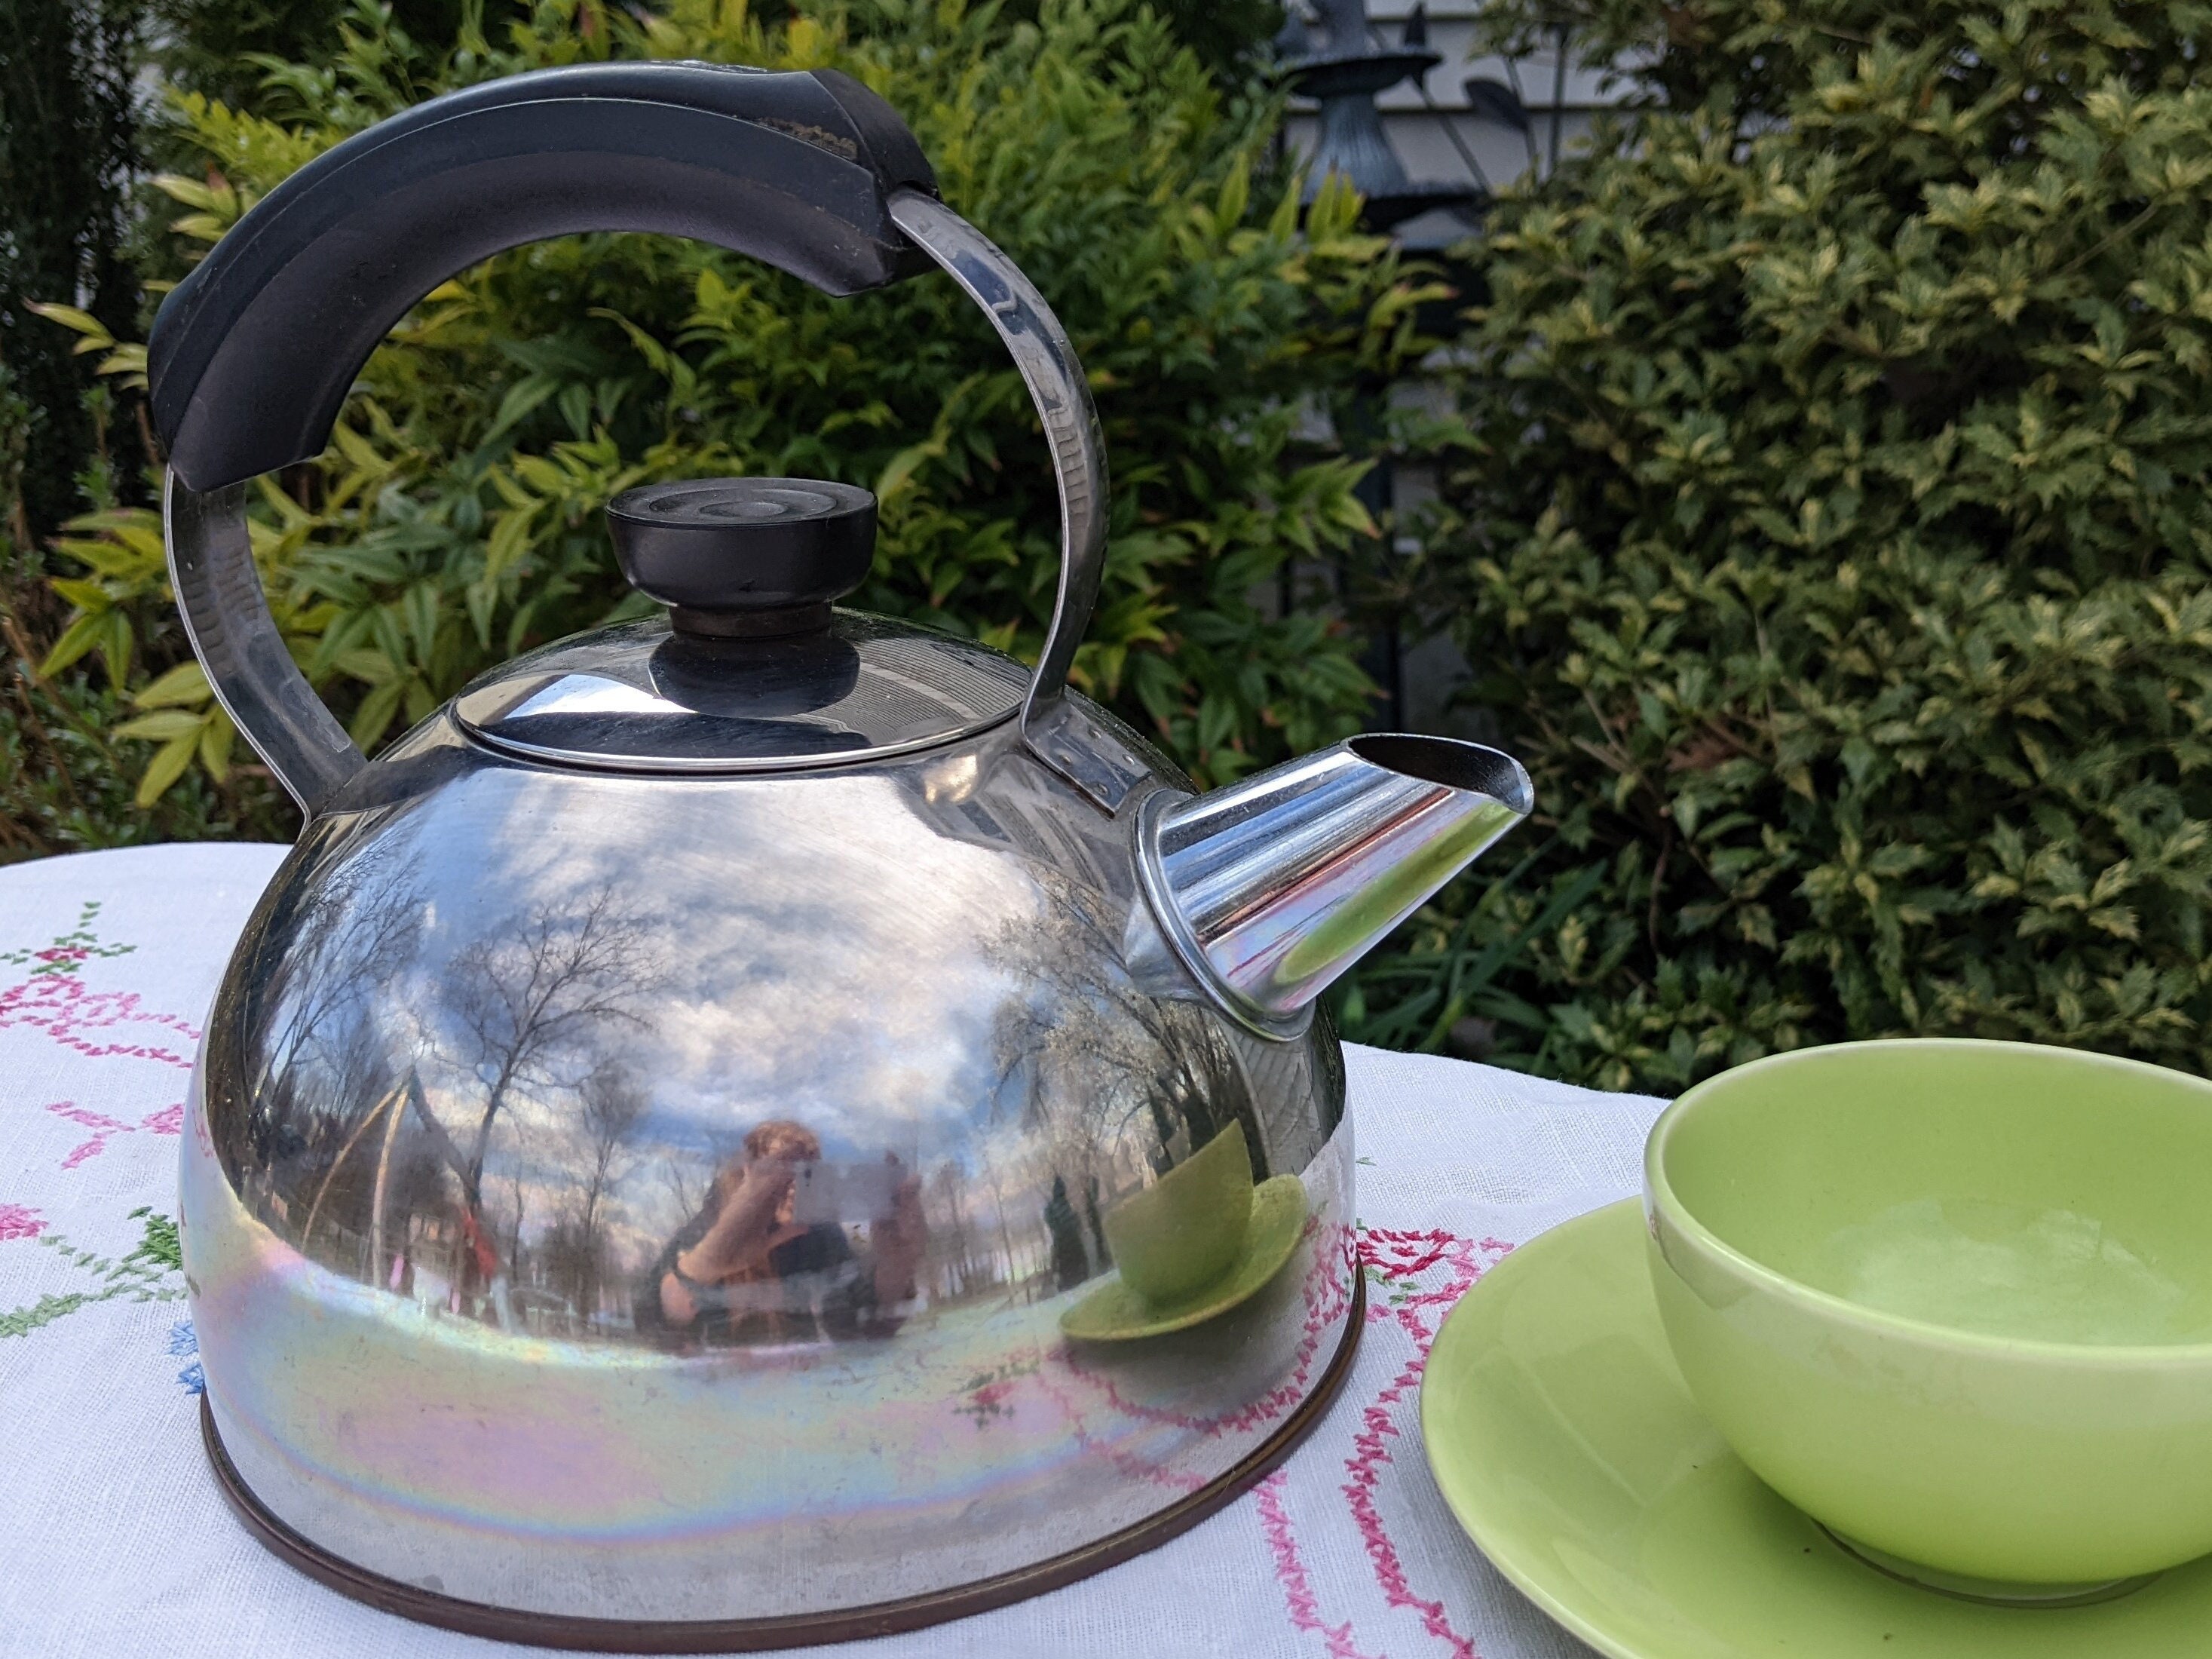 2 1/3 Qt Revere Ware Copper Red Aluminum Whistling Tea Kettle Made in Rome,  NY Vintage Revere Red Kettle More Revere in 19thrifty Shop 